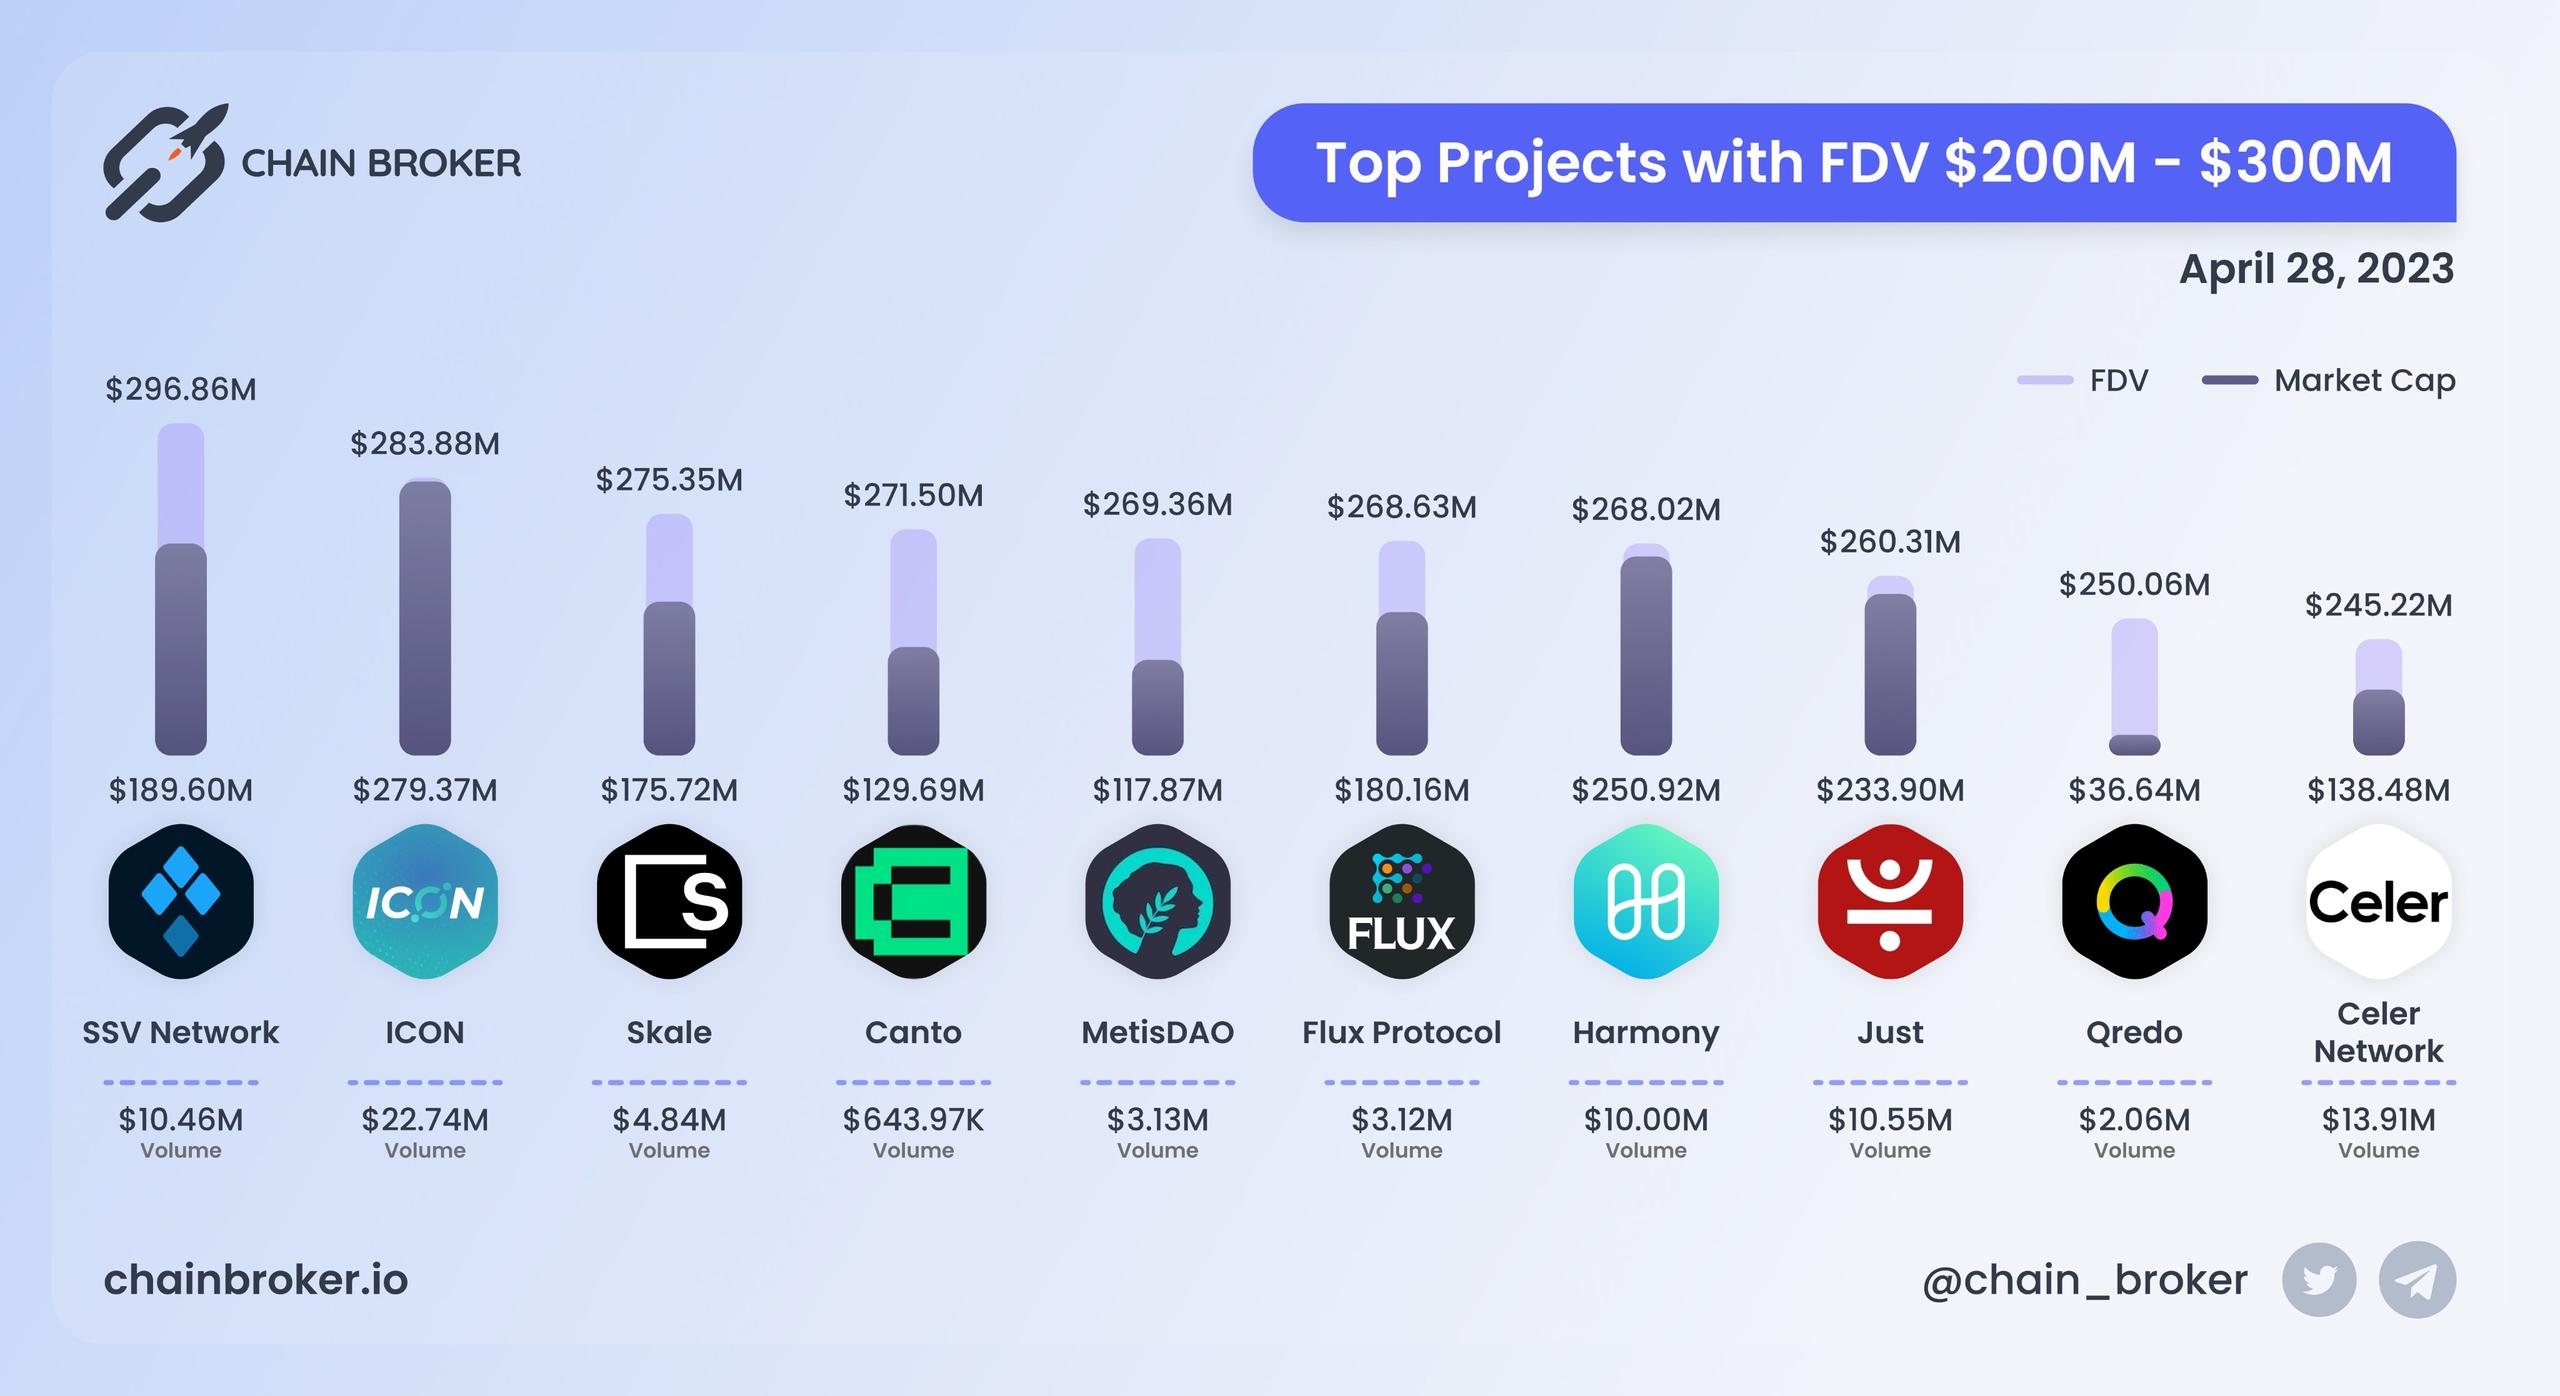 Top projects with FDV $200M - $300M